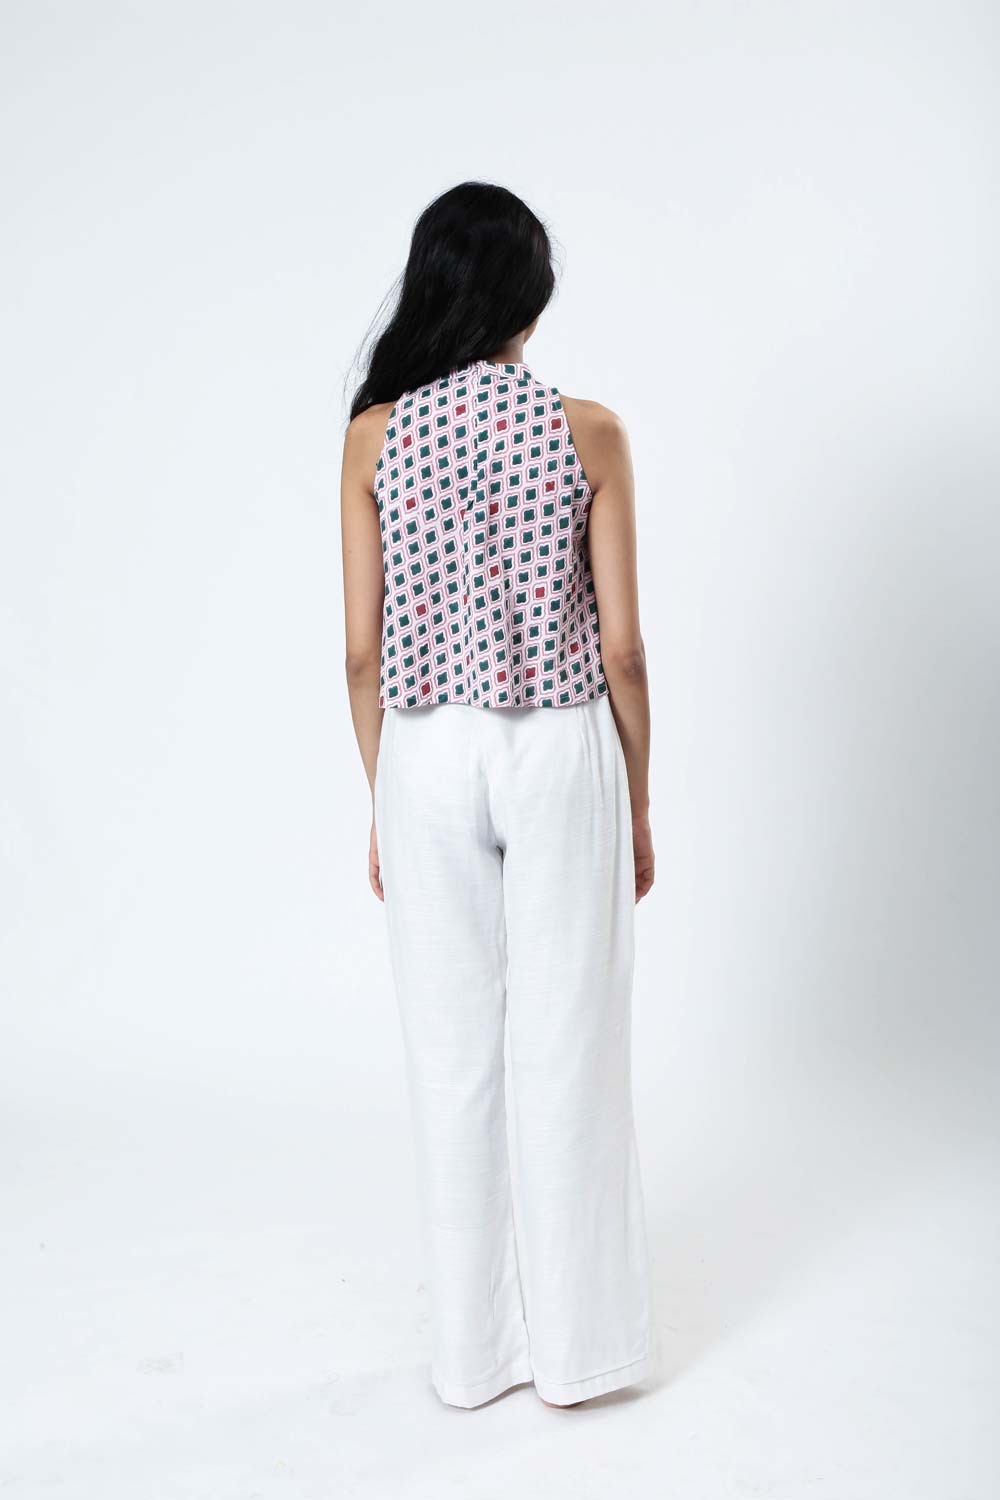 Block Printed Jaali Flared Crop as seen on The Lazy Insomniac